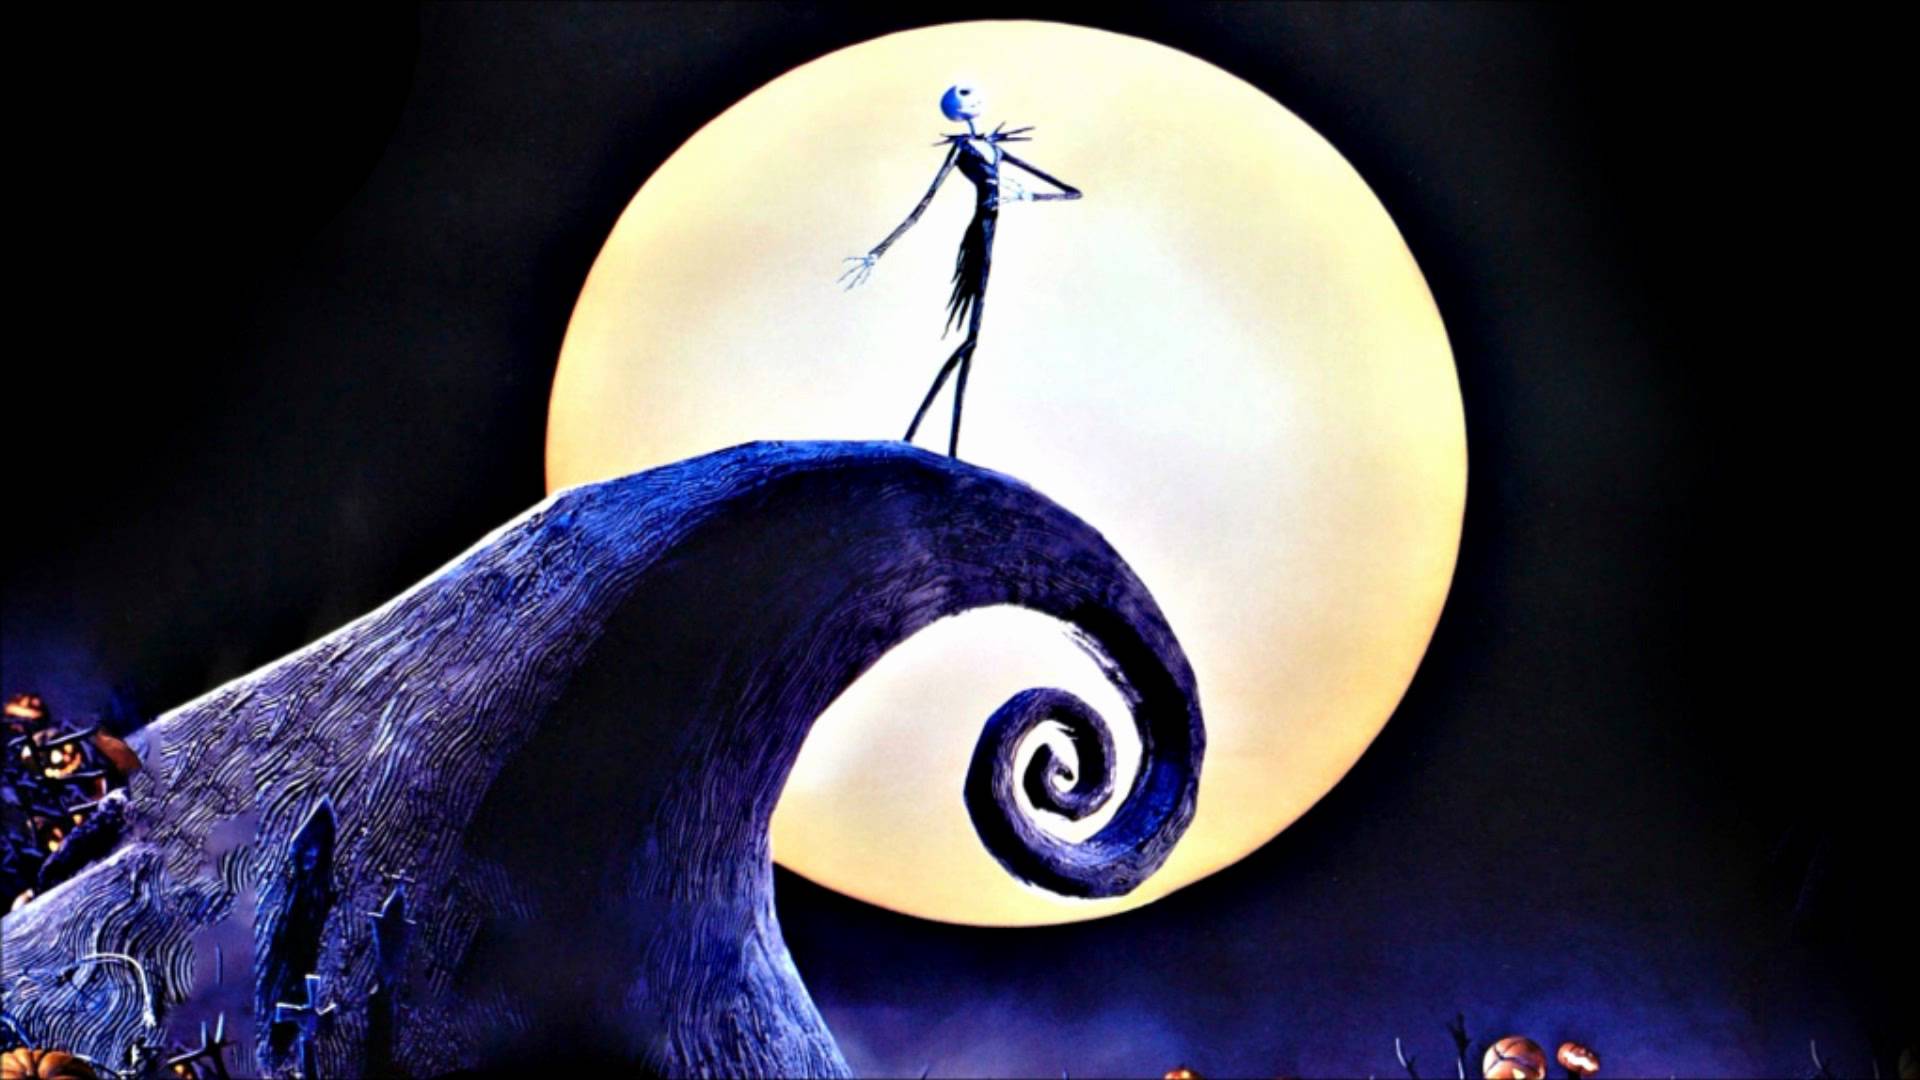 Wallpaper For > Nightmare Before Christmas Jack And Sally Desktop